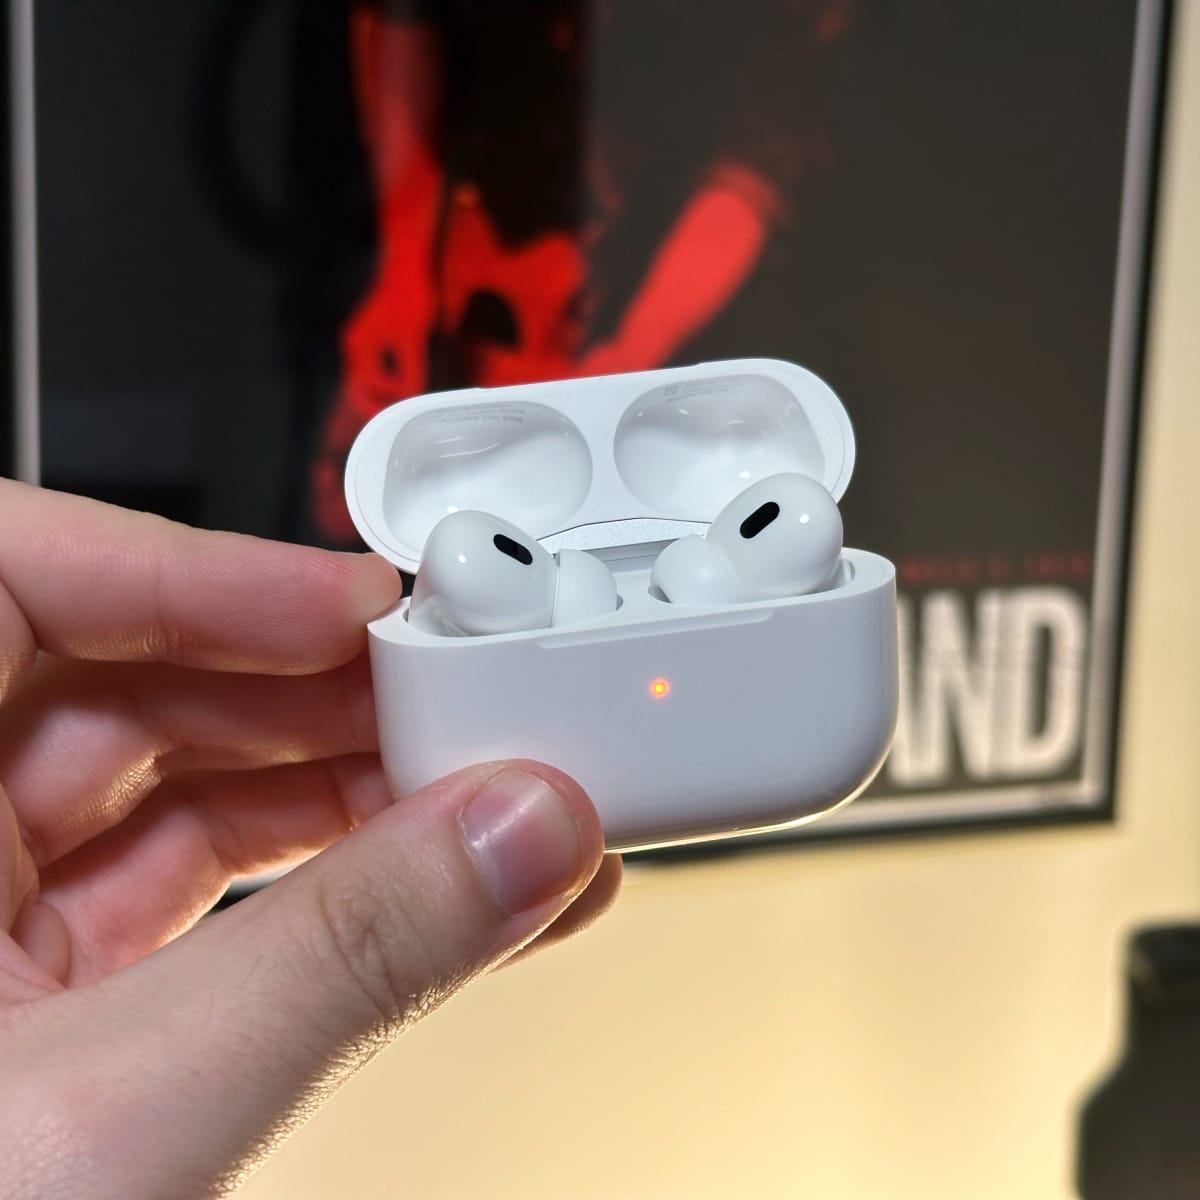 The AirPods Pro Design Is Already a Meme